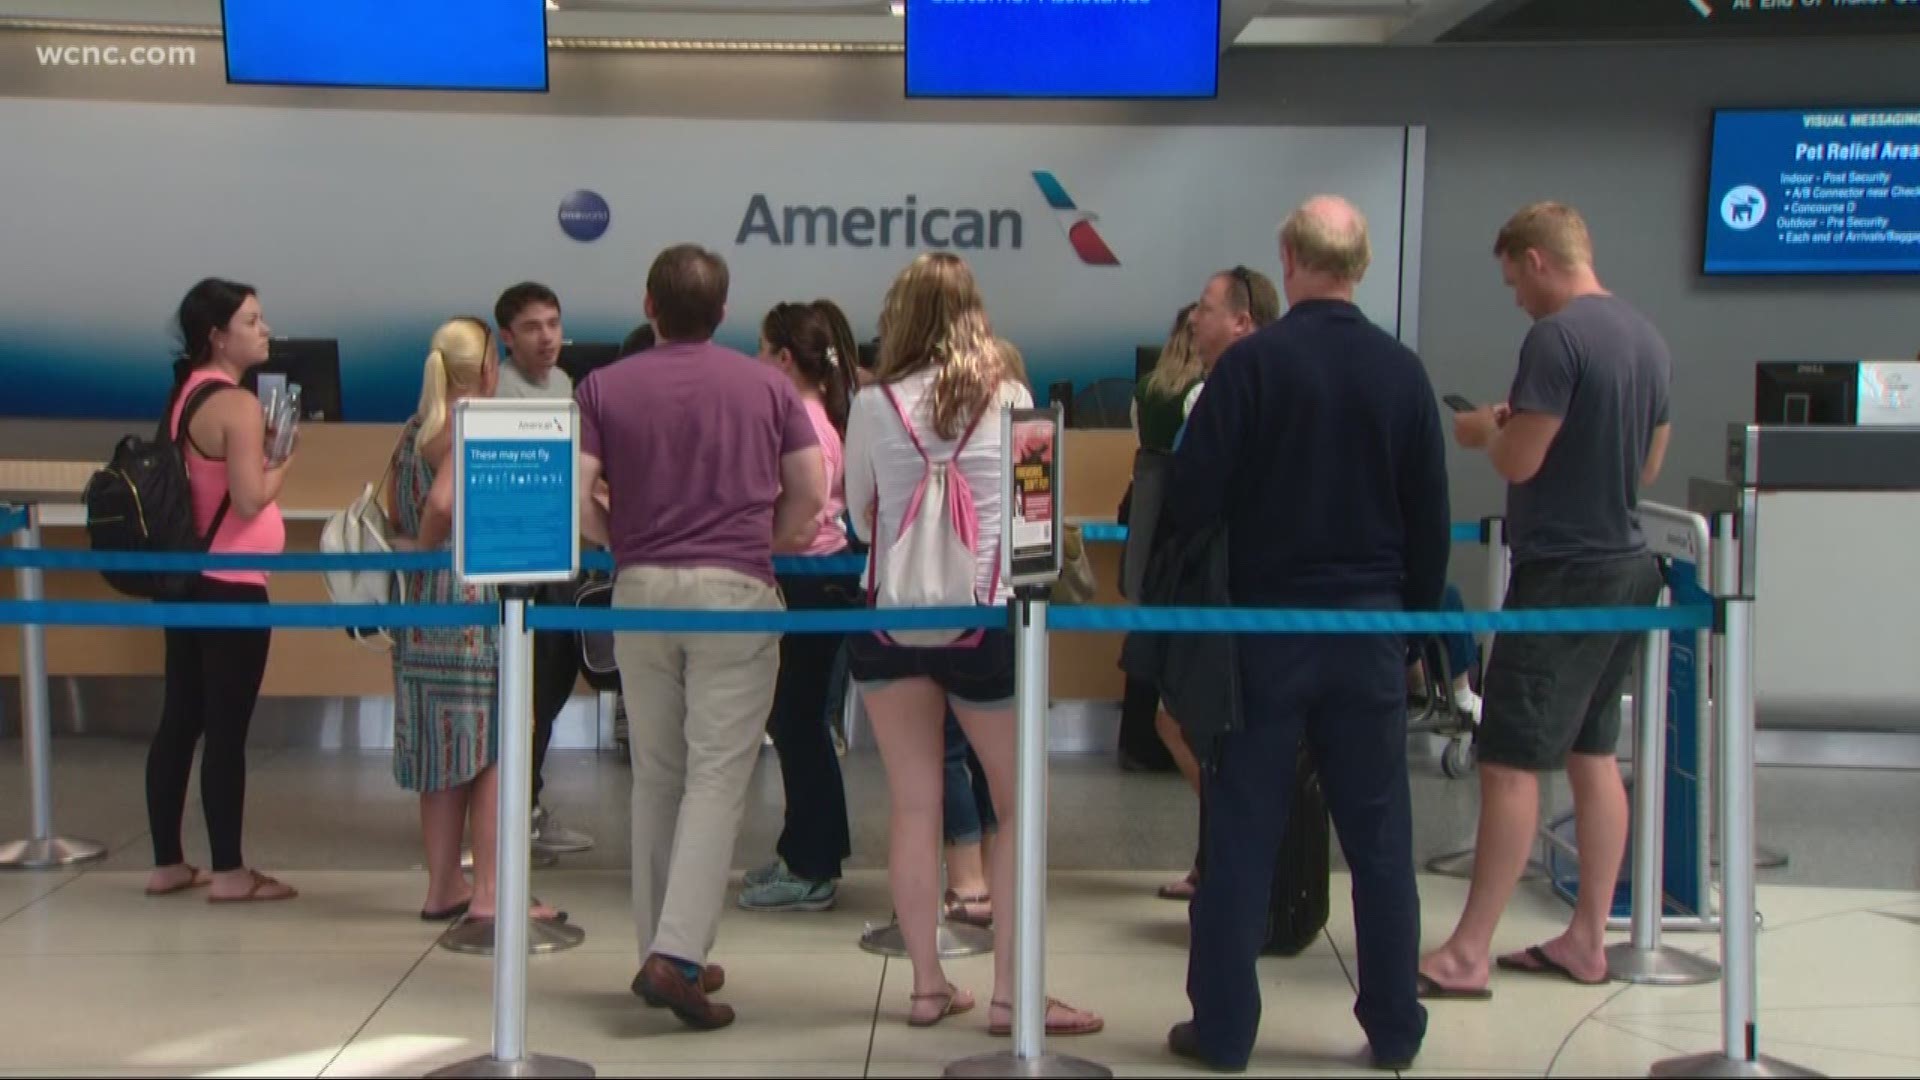 For the second time in a week, a technical glitch is causing major issues for travelers at the Charlotte Douglas International Airport.